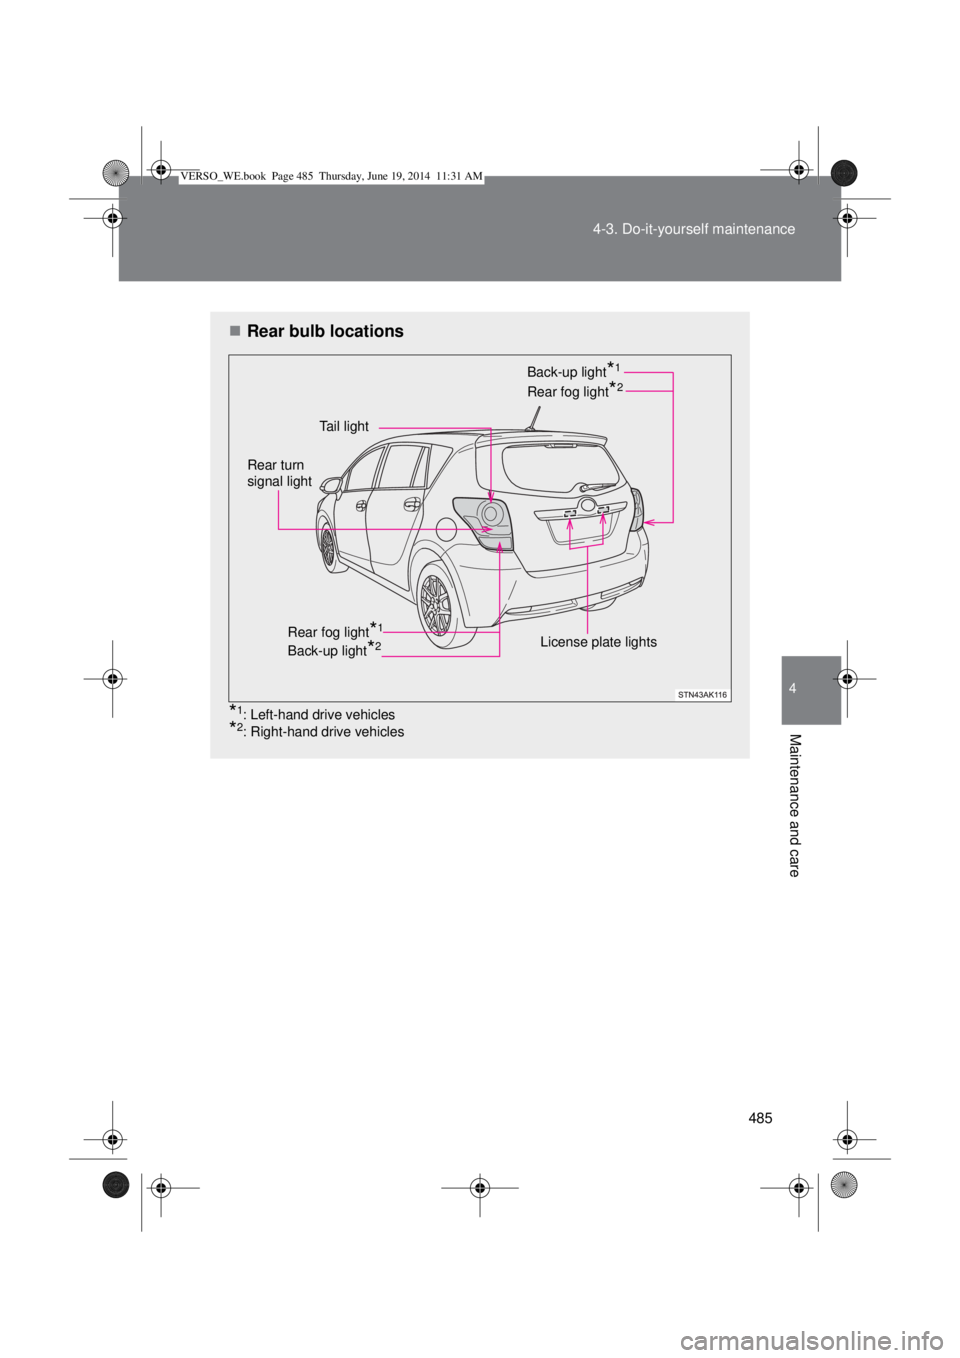 TOYOTA VERSO 2015  Owners Manual 485 4-3. Do-it-yourself maintenance
4
Maintenance and care
Rear bulb locations
*1: Left-hand drive vehicles
*2: Right-hand drive vehicles
Tail light
Rear fog light*2
License plate lights Rear turn 